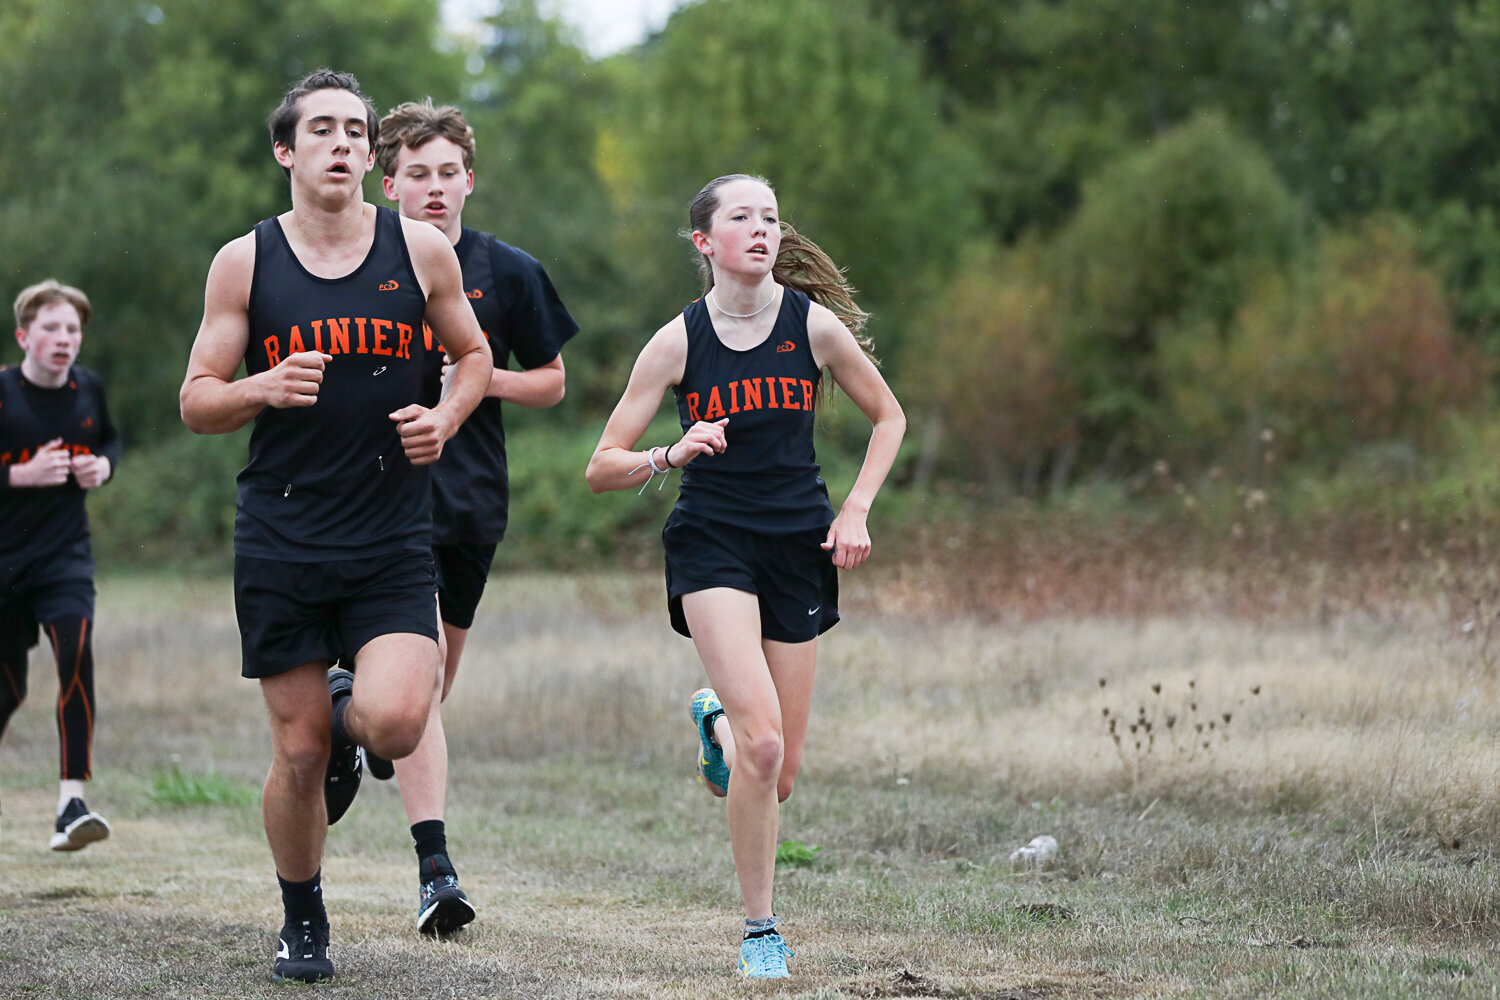 Rainier's Madison Ingram runs next to teammate Zander Peck during a 2B meet at Adna on Sept. 28. Ingram ran with the boys and finished in 15:46, good enough for 11th in that race and first in the girls' field by over 90 seconds.